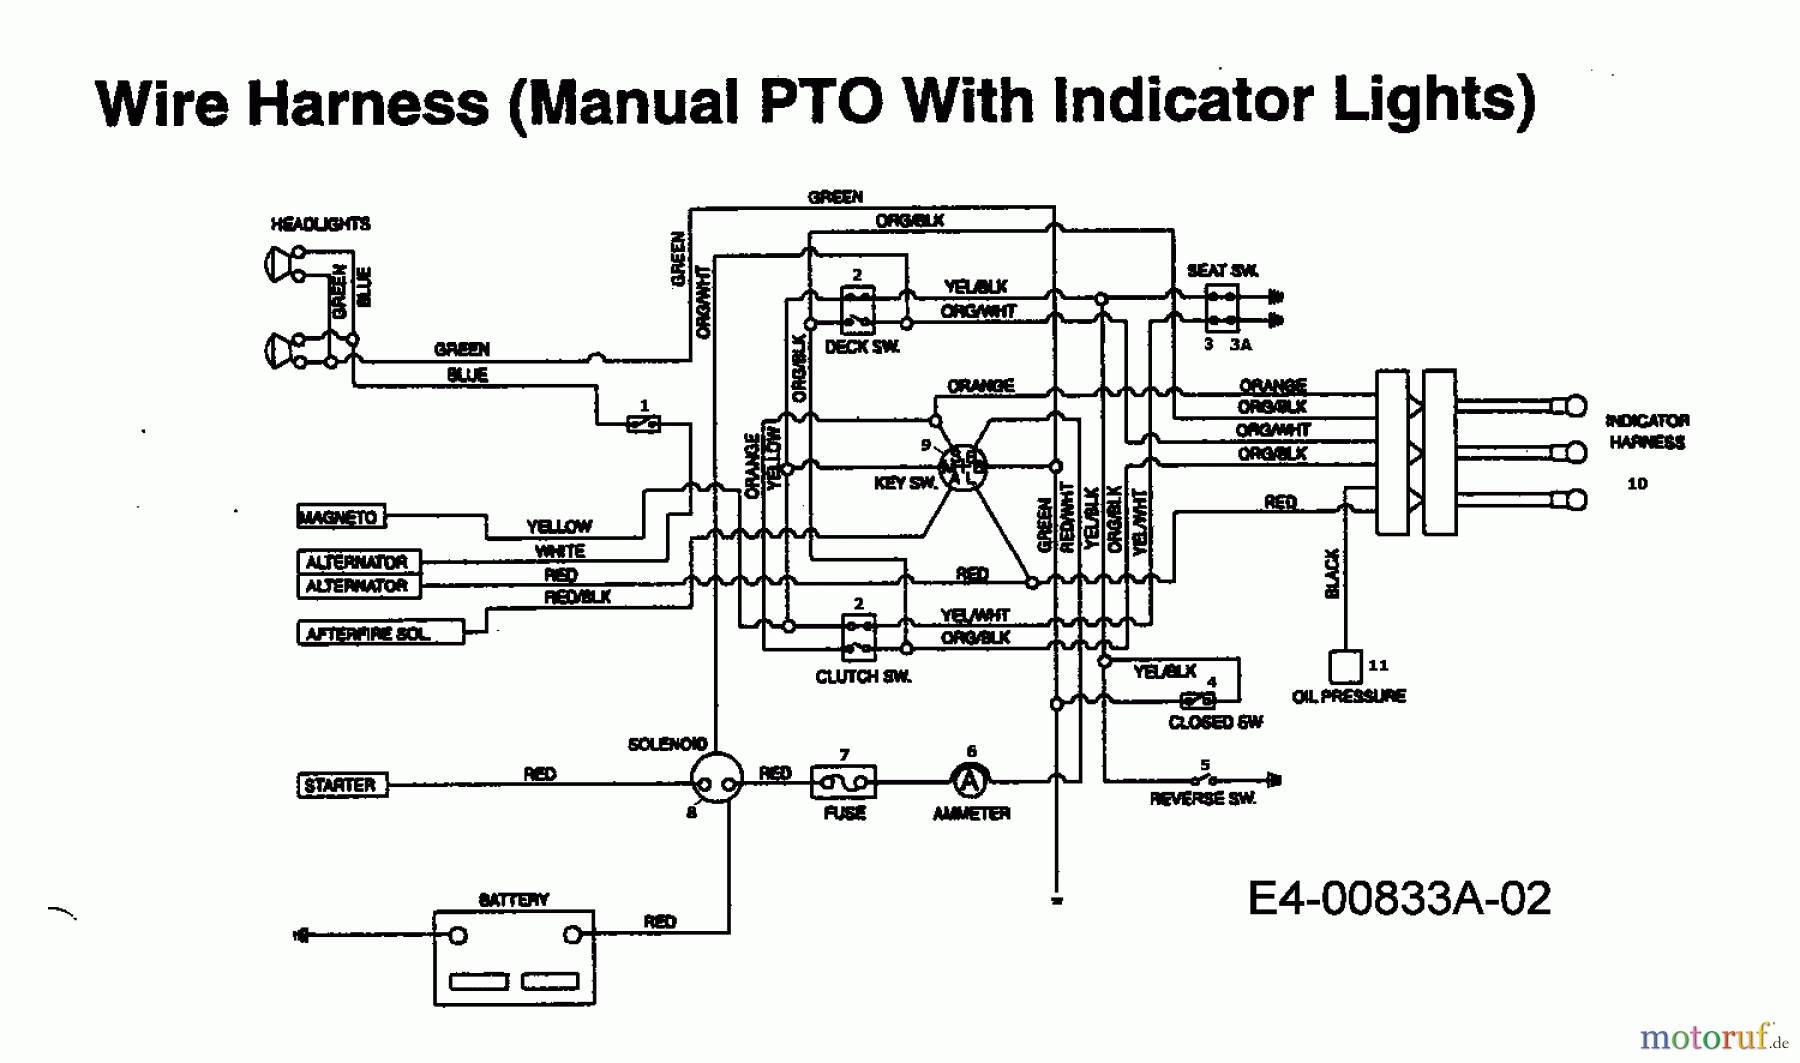  Mastercut Lawn tractors 155/102 H 13AD791N659  (1997) Wiring diagram with indicator lights